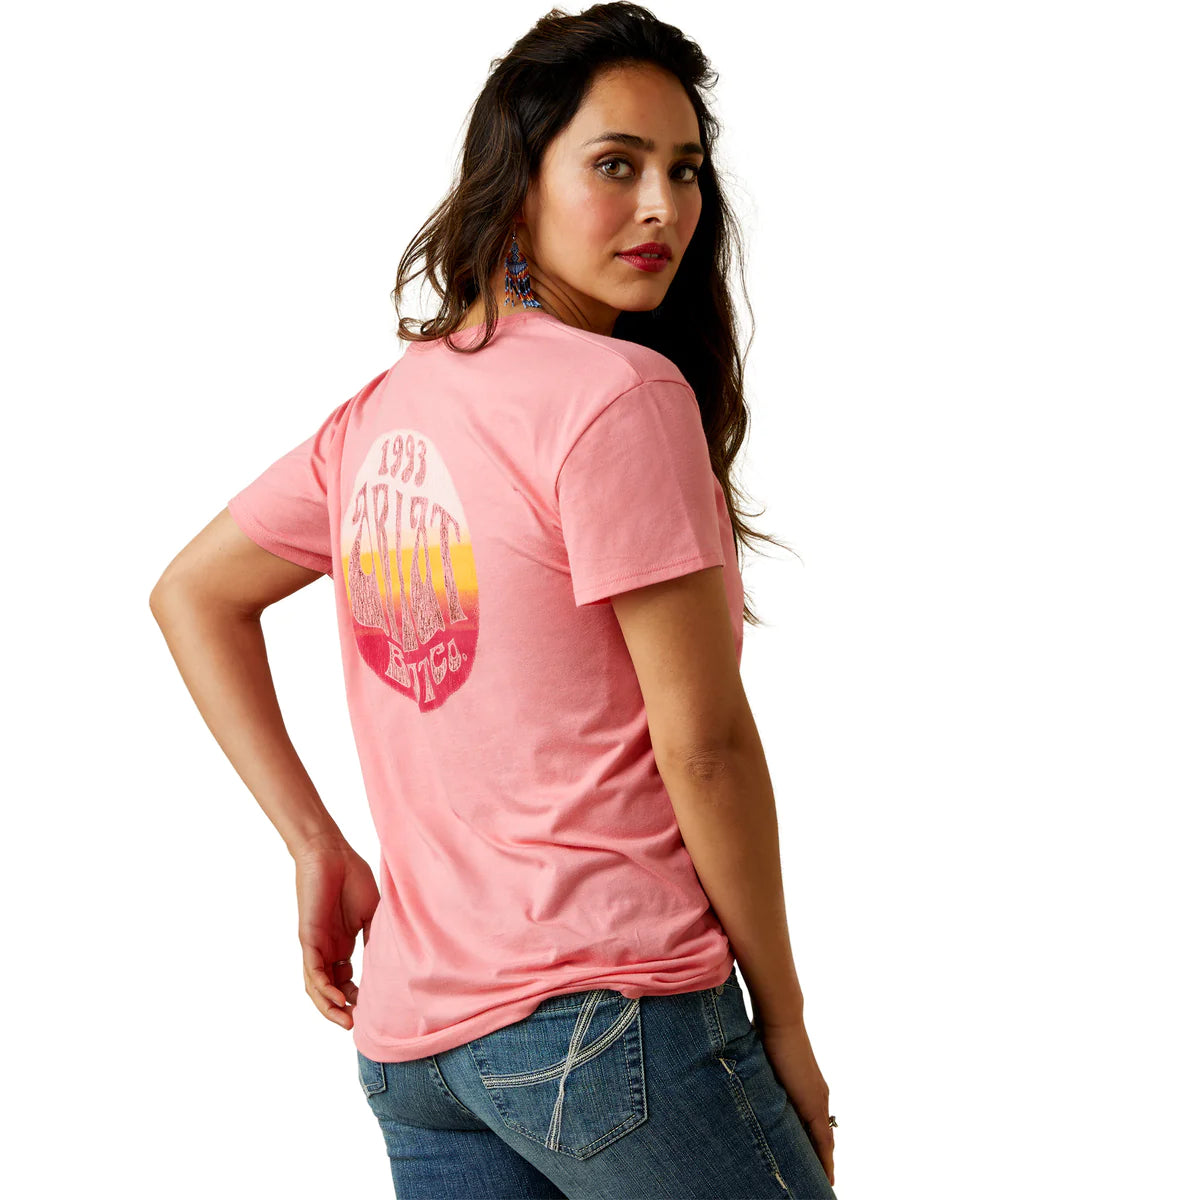 Ariat Wms Groovy SS Tee Coral Heather